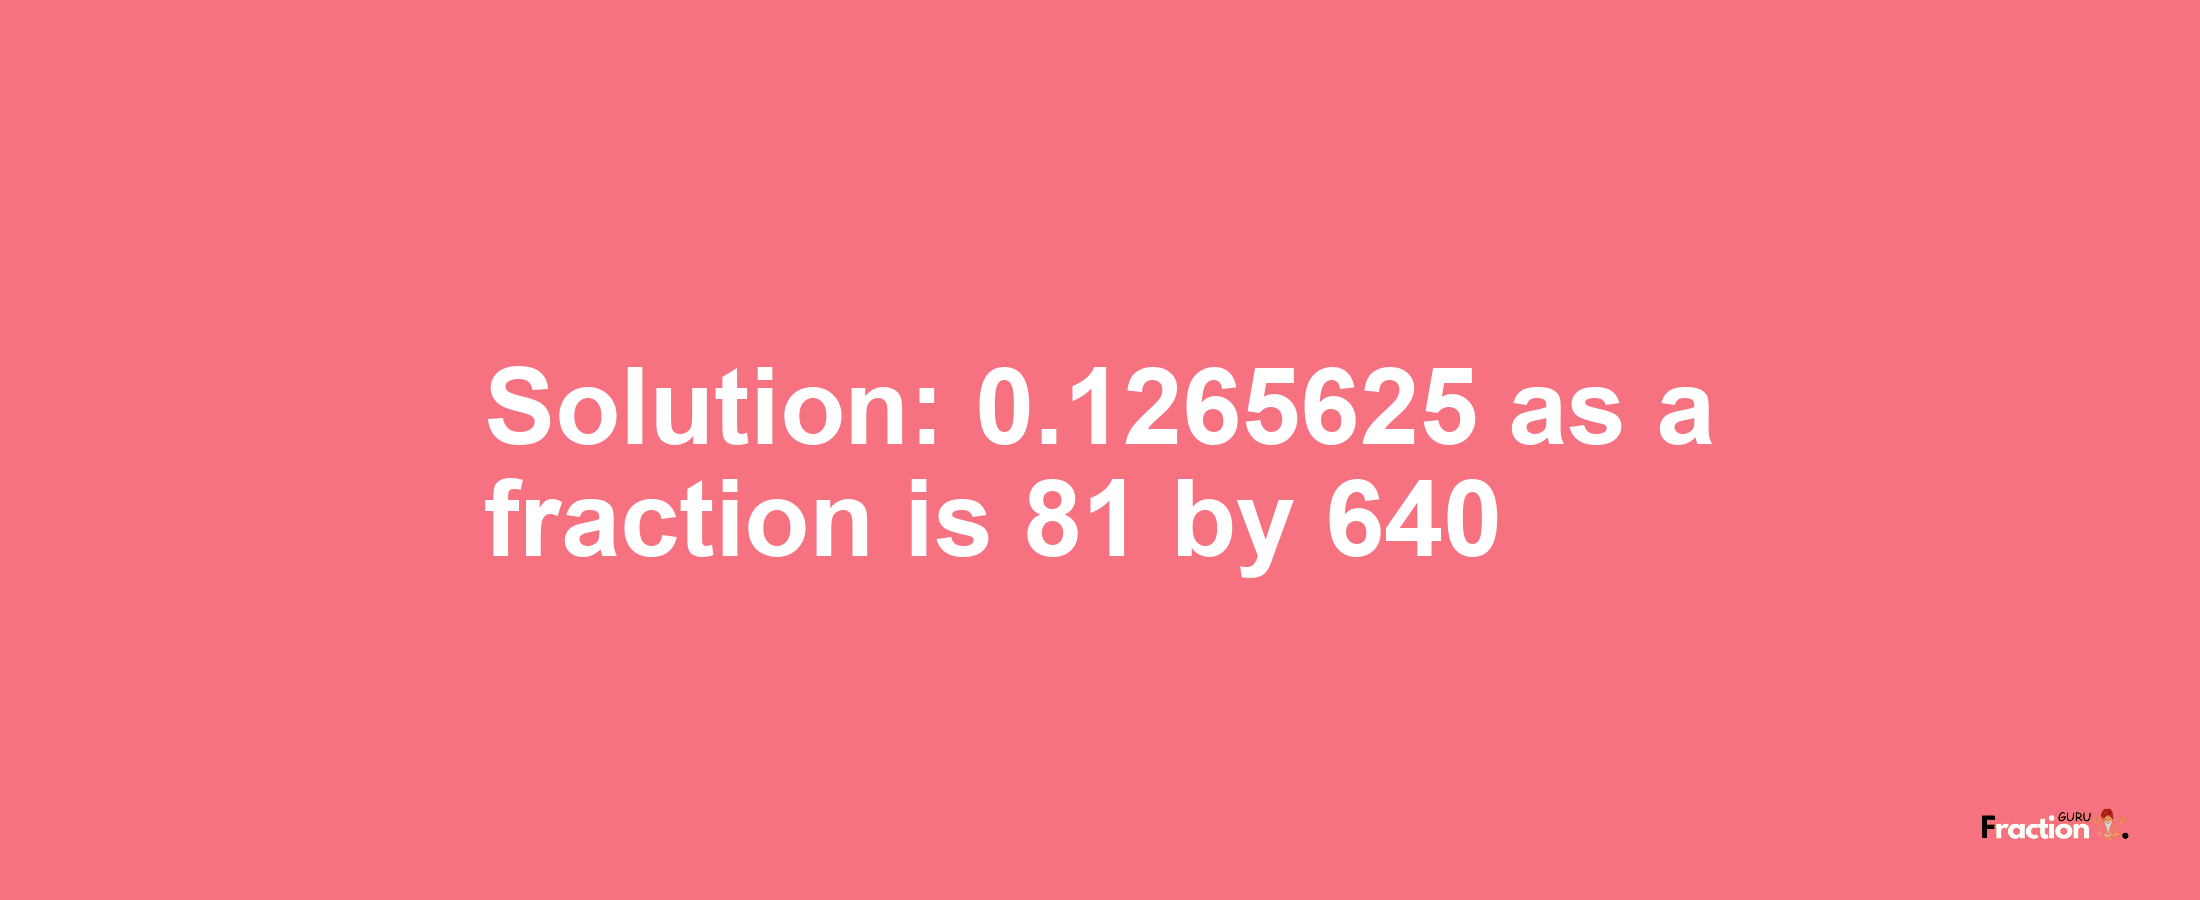 Solution:0.1265625 as a fraction is 81/640